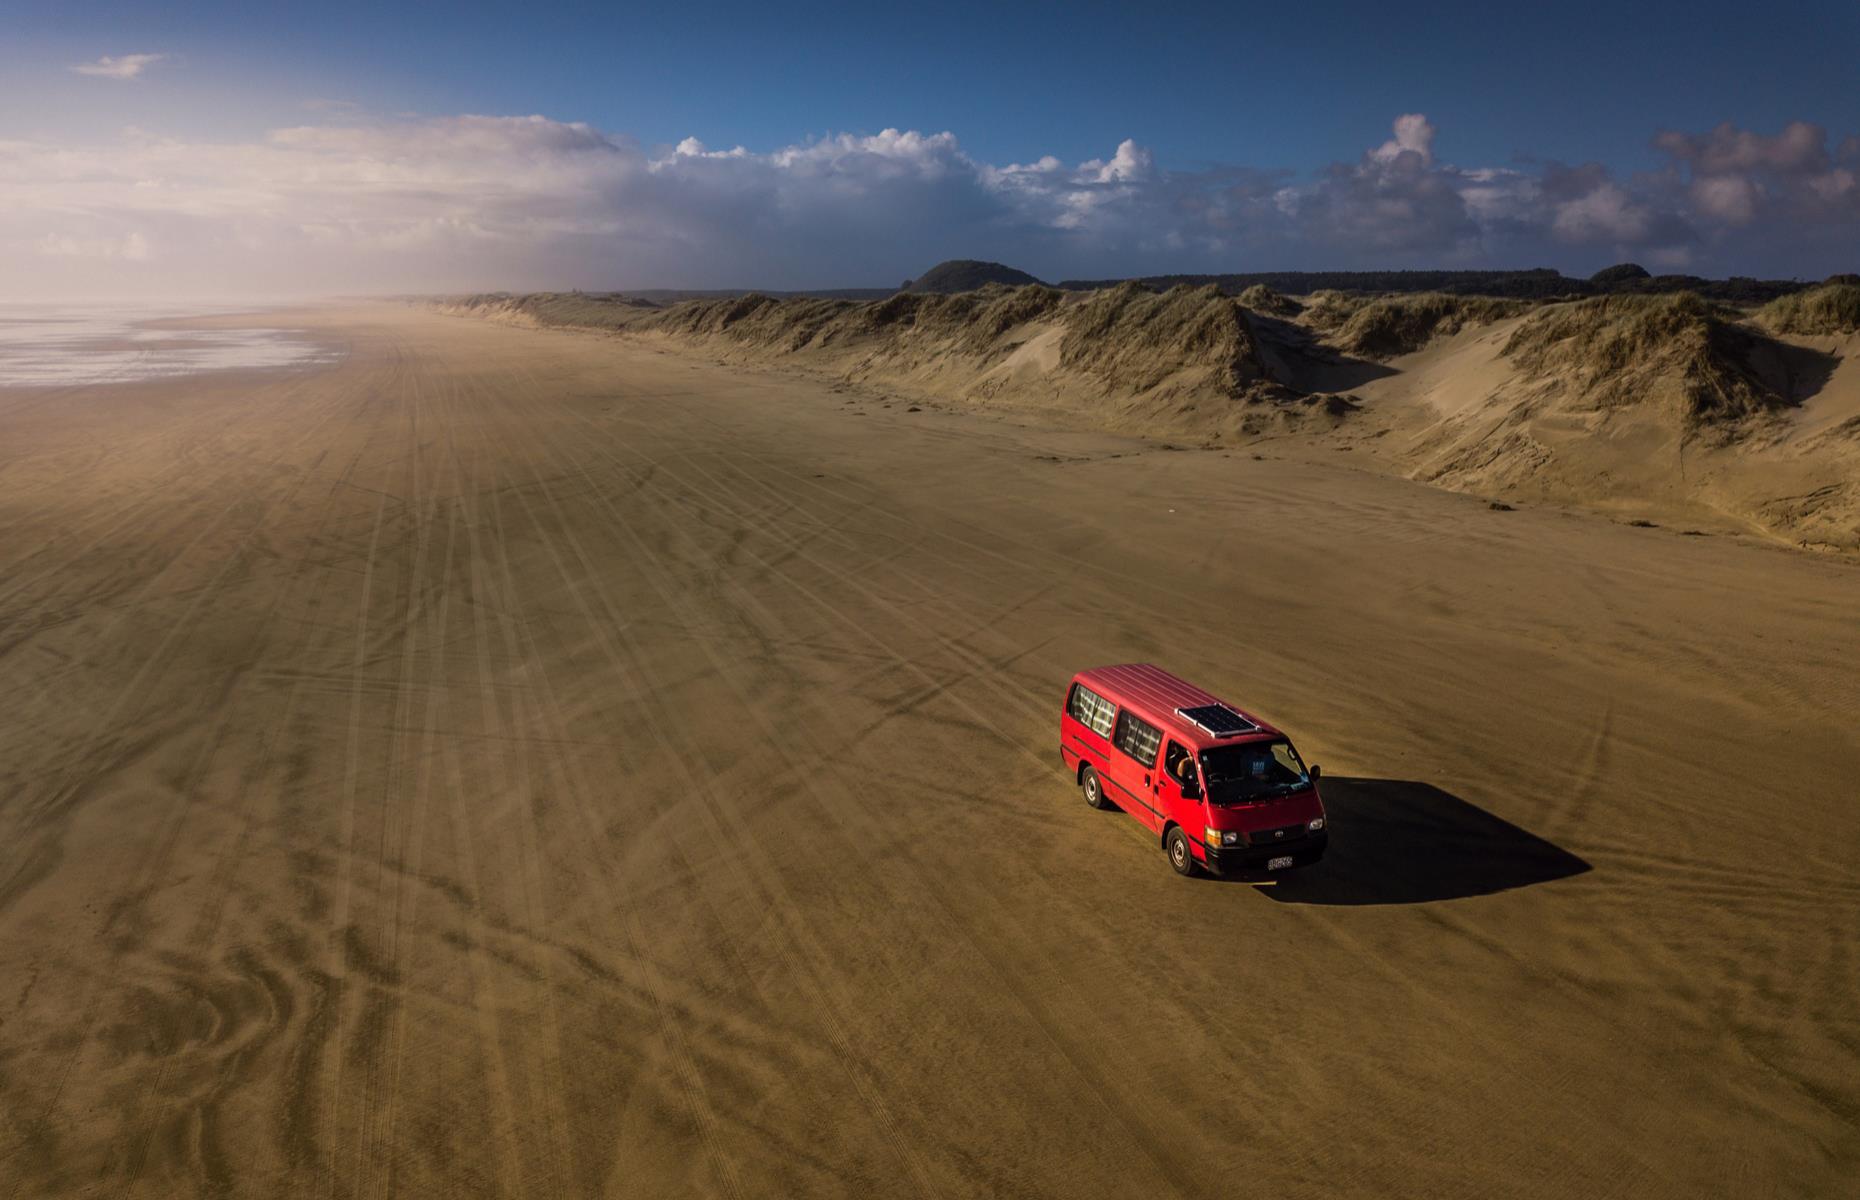 <p>The far north’s Ninety Mile Beach is officially a highway – but one that's only suitable for 4WD vehicles. Beefed-up minibuses regularly run <a href="https://www.dolphincruises.co.nz/bay-of-islands-tours/cape-reinga-ninety-mile-beach">tours</a> up and down the sands from Kaitaia to Scott Point, while more adventurous travellers tackle the sands in their own vehicles (though rental cars don't allow you to drive on the beach). A seemingly never-ending stretch of sand, Ninety Mile Beach, which is actually 55 miles (88.5km) long, is famed for spectacular sunsets and one of the best left-hand surf breaks in the world.</p>